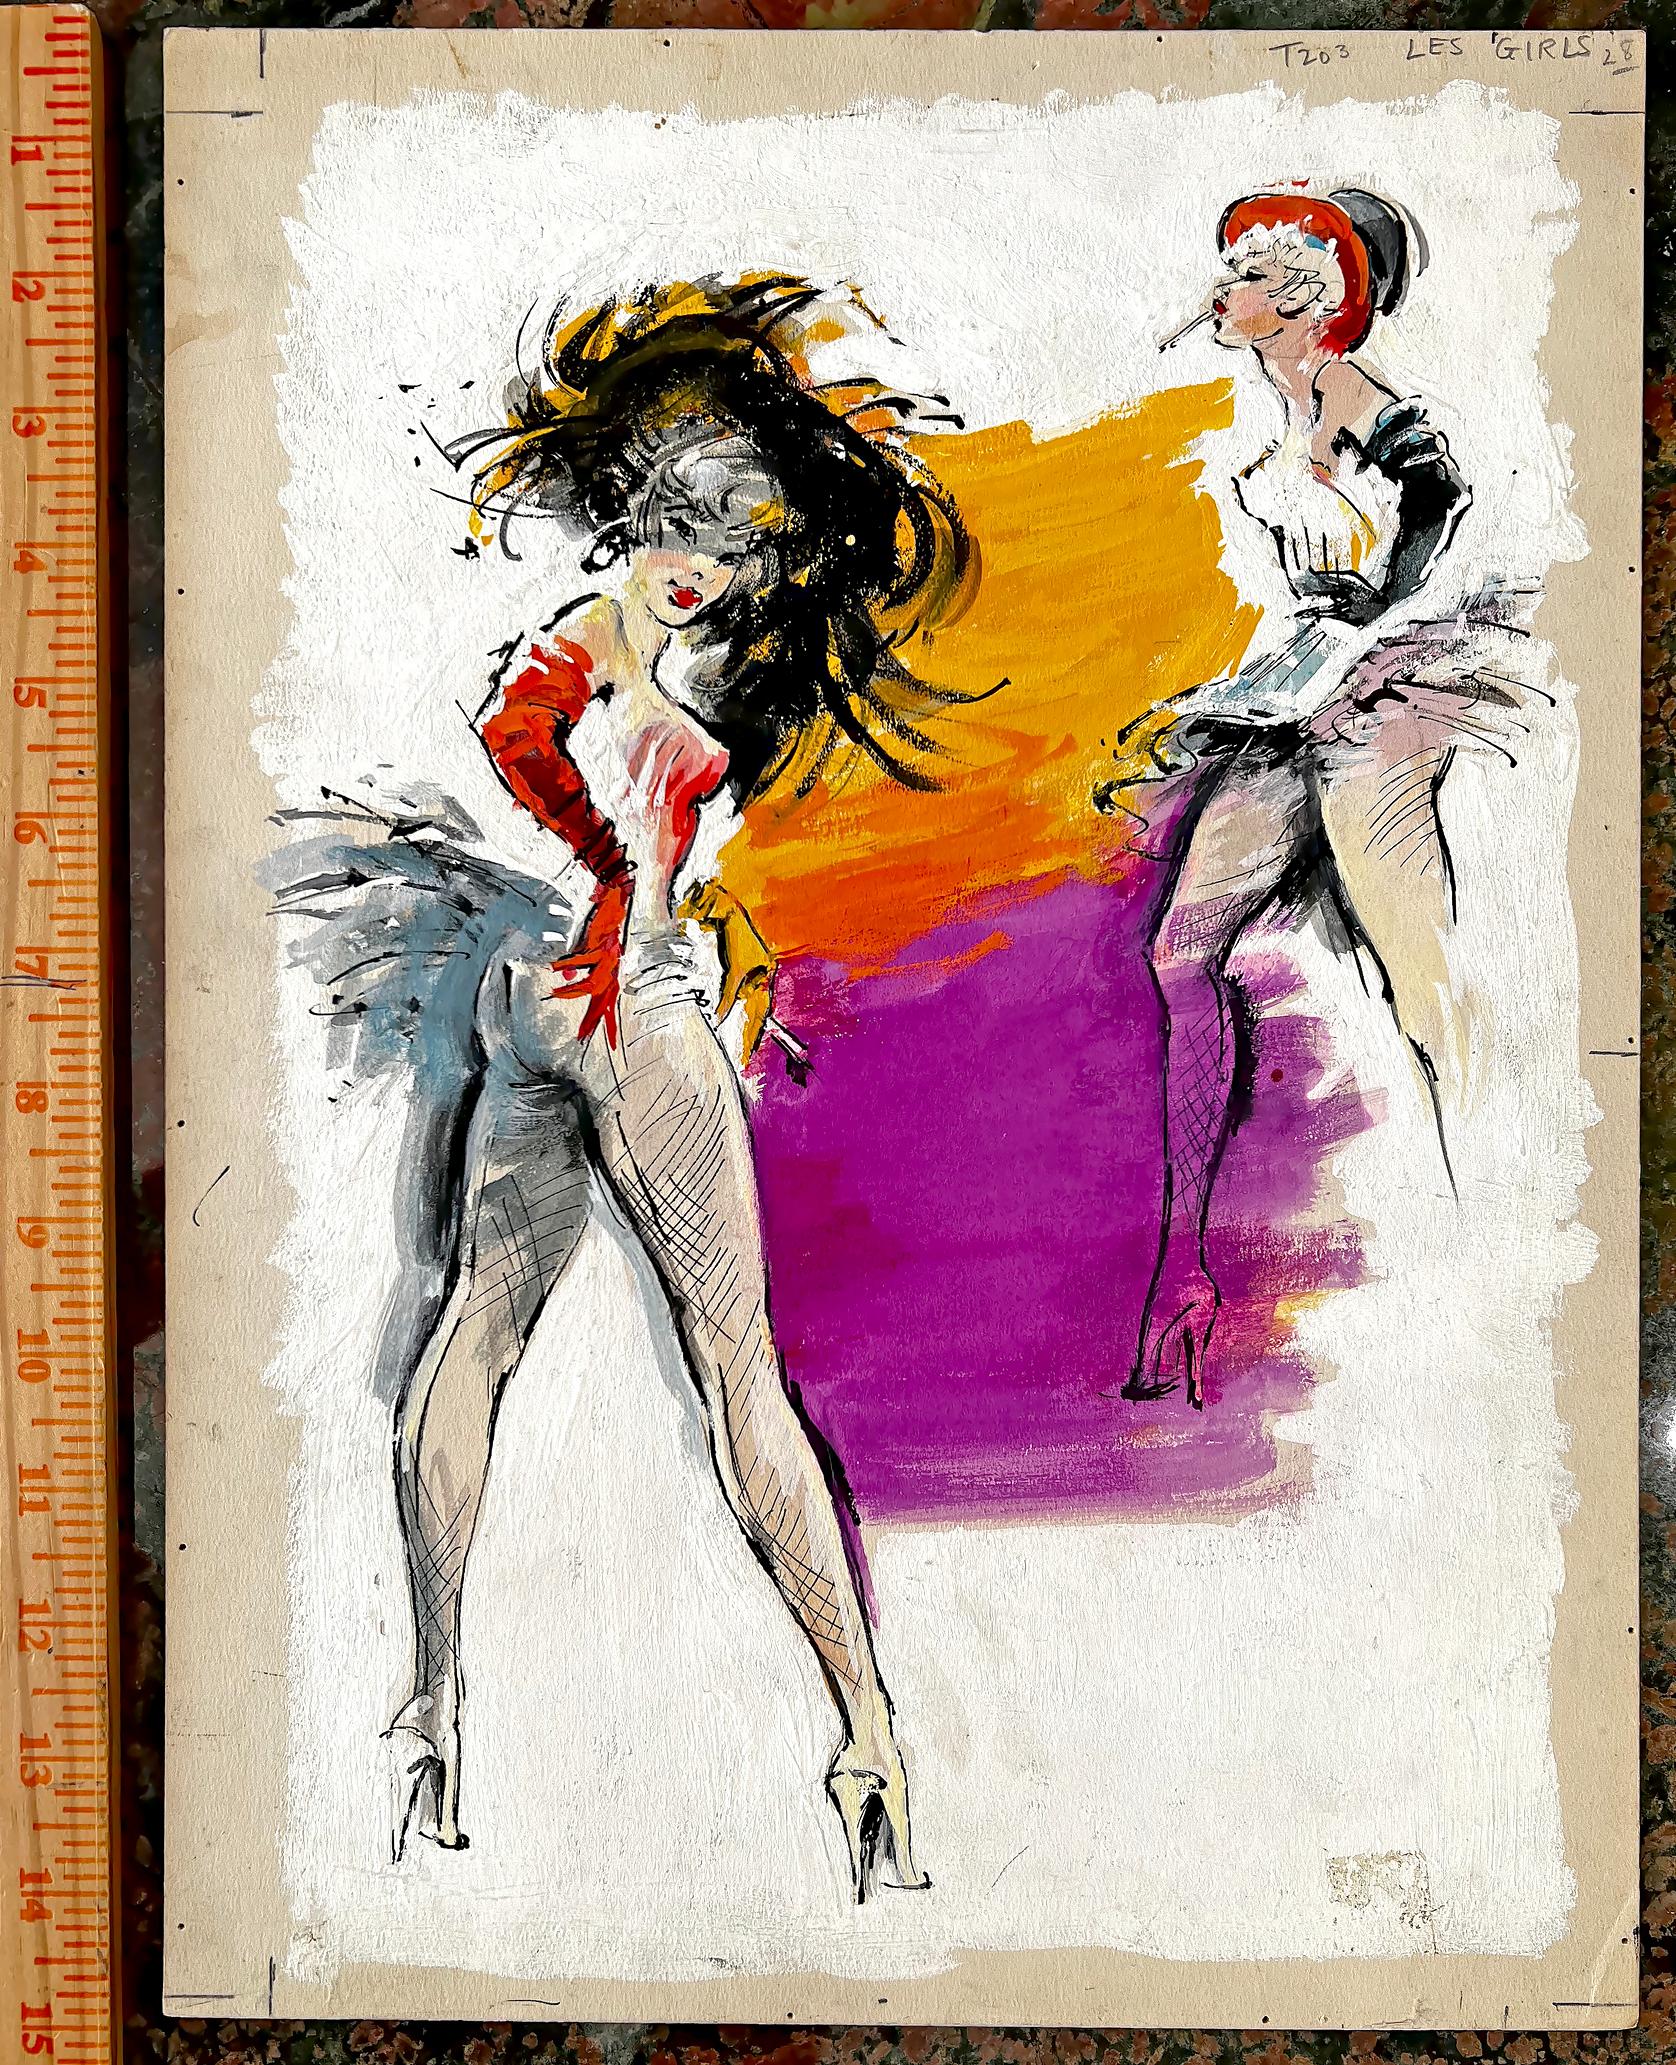 Sexy French Cabaret Dancers - Folies Bergere  Pulp Paperback Book Cover - Impressionist Painting by George Ziel